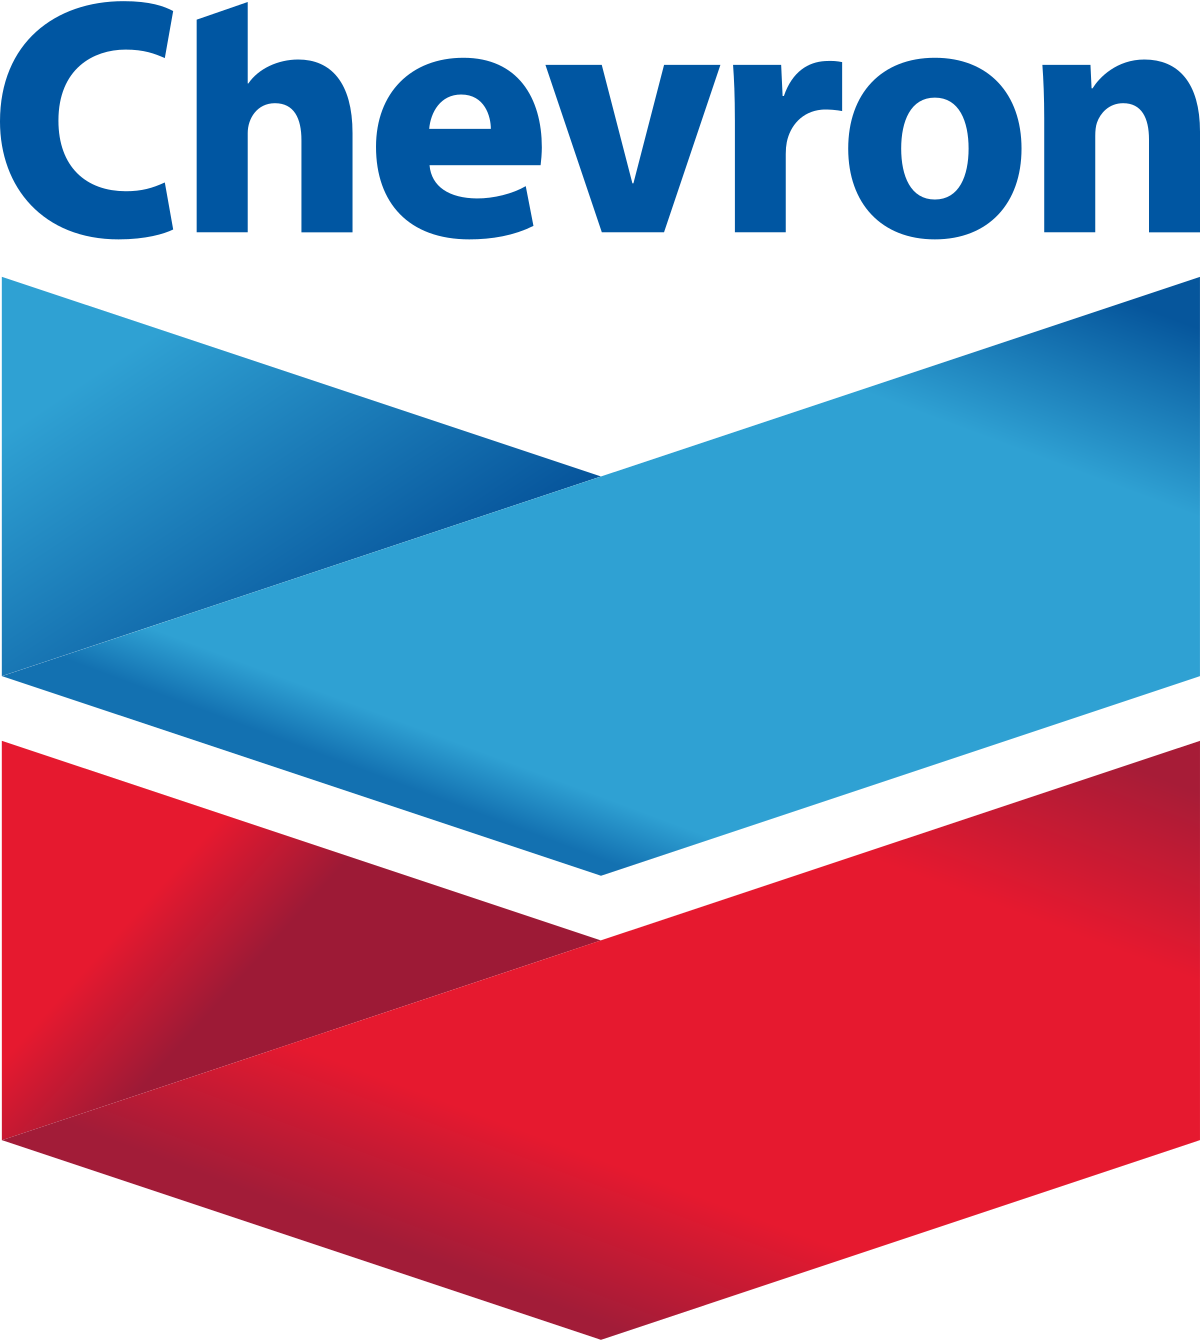 Chevron sanctions Ballymore project in deepwater U.S. Gulf of Mexico